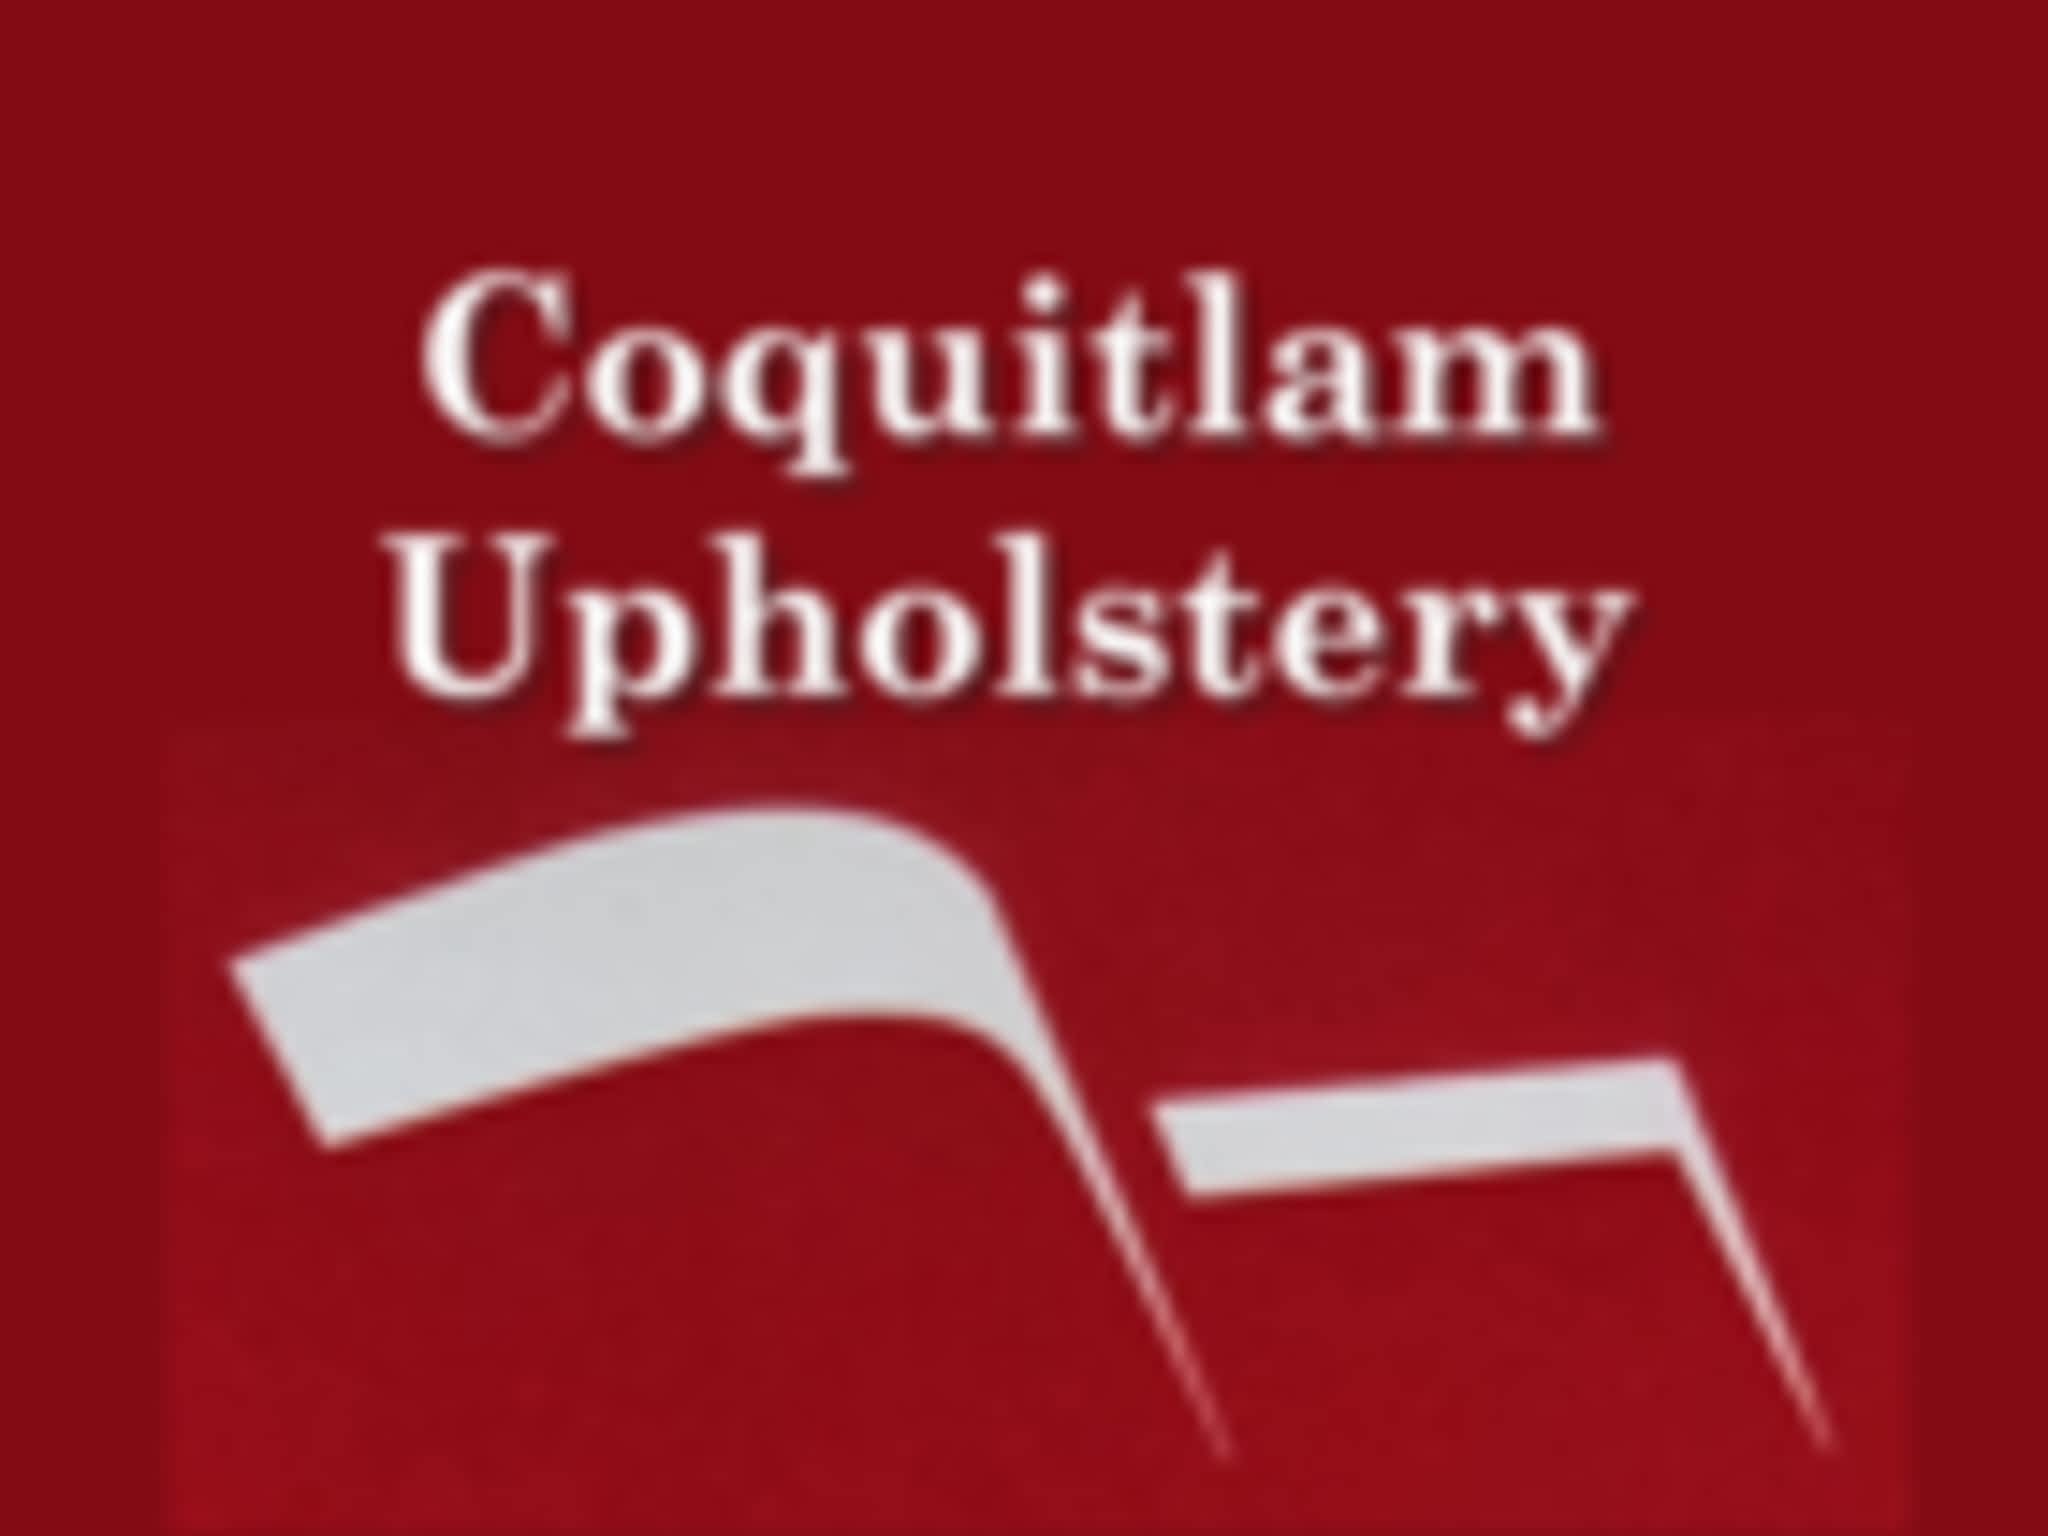 photo Coquitlam Upholstery